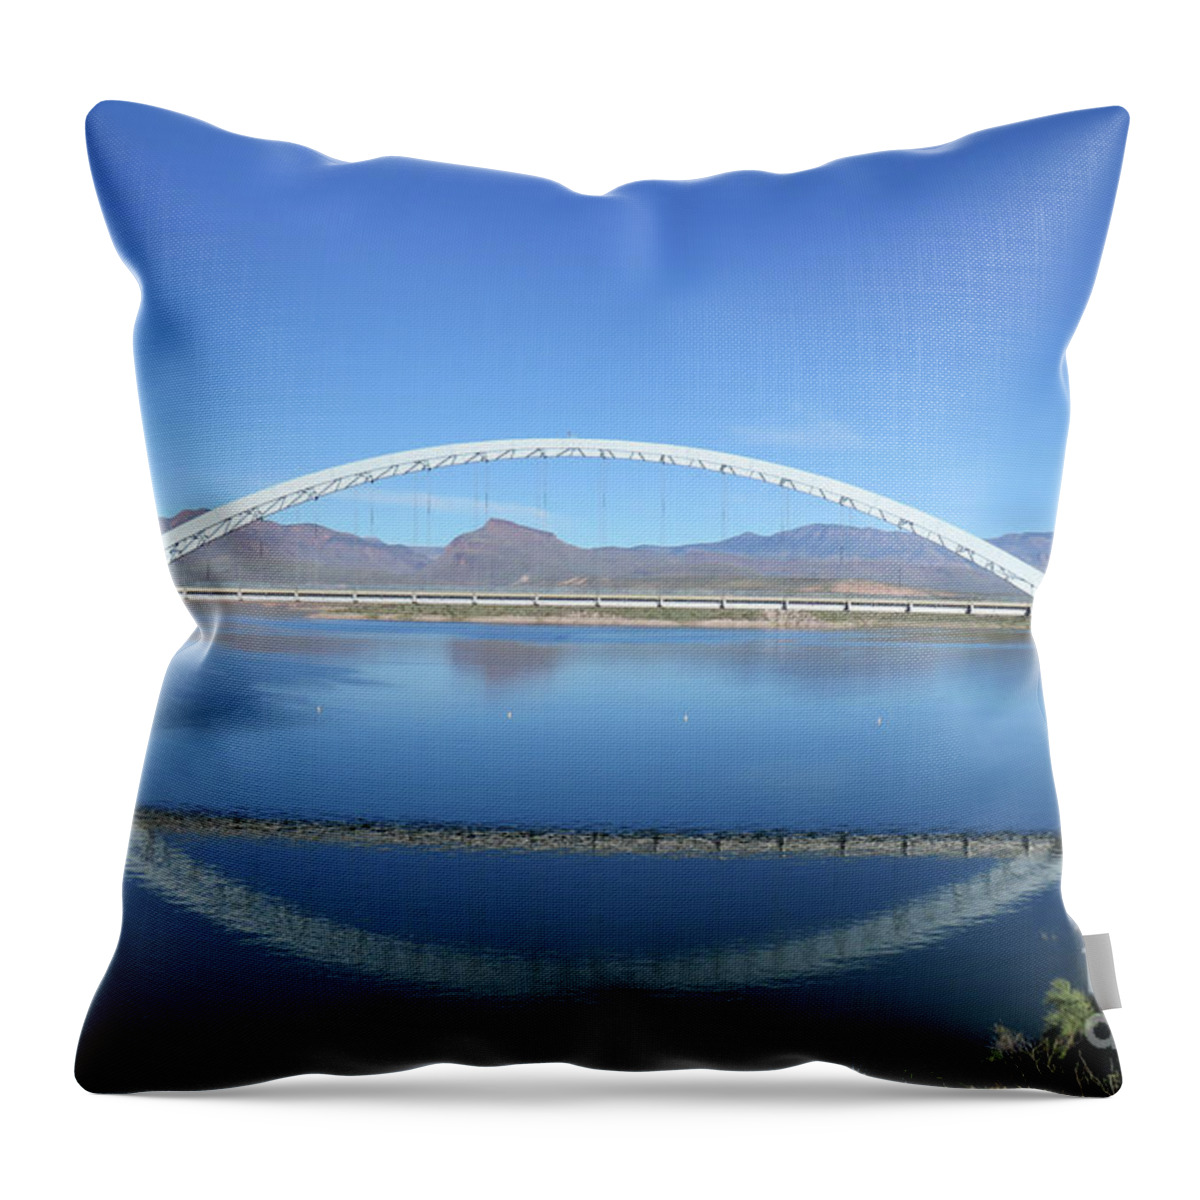 Reflection Throw Pillow featuring the photograph Roosevelt Reflection by Mary Mikawoz